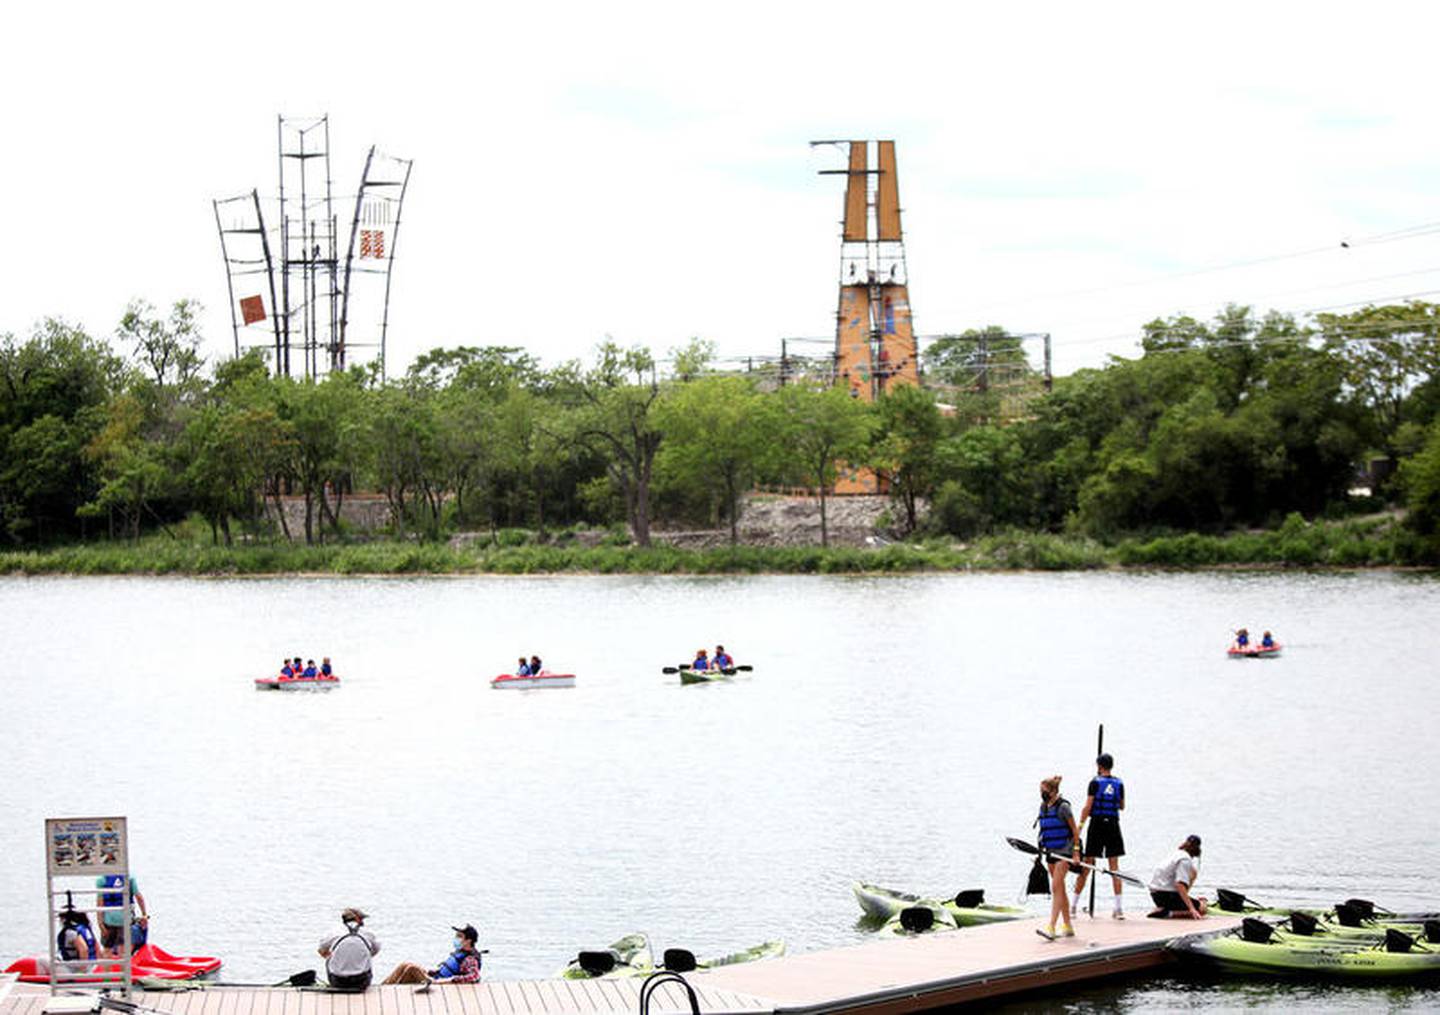 Paddlers enjoy the water at The Forge: Lemont Quarries adventure park in Lemont. The park, which features mountain biking, climbing towers, ziplines, water sports and much more, opened July 17, 2020.